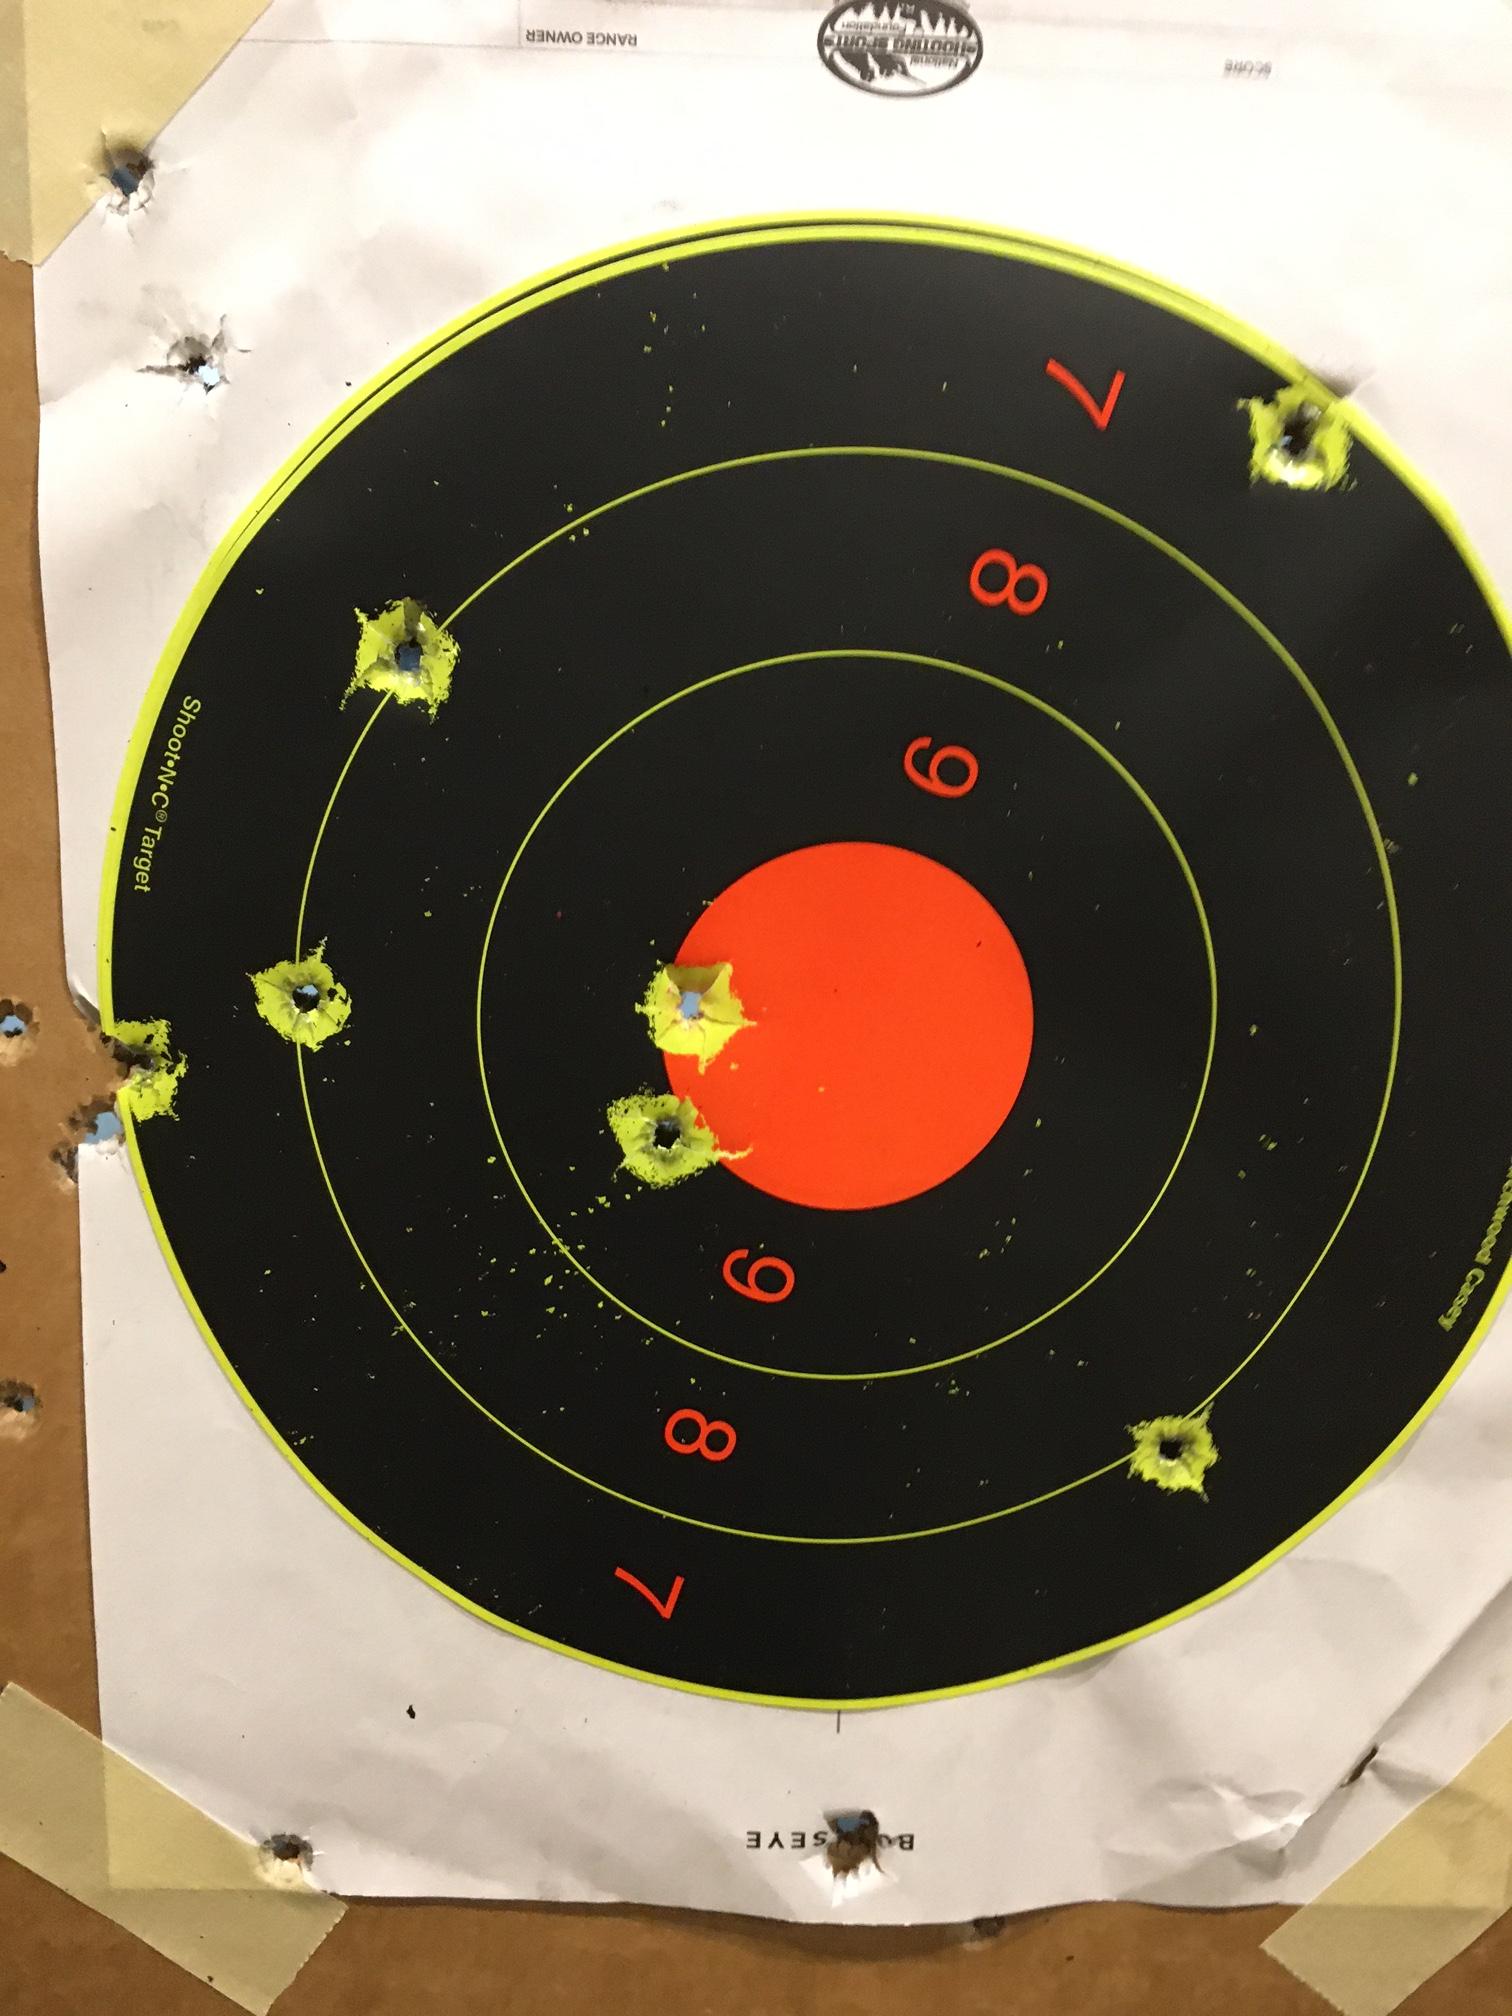 Open carry, 7 yards, 3 seconds round 1